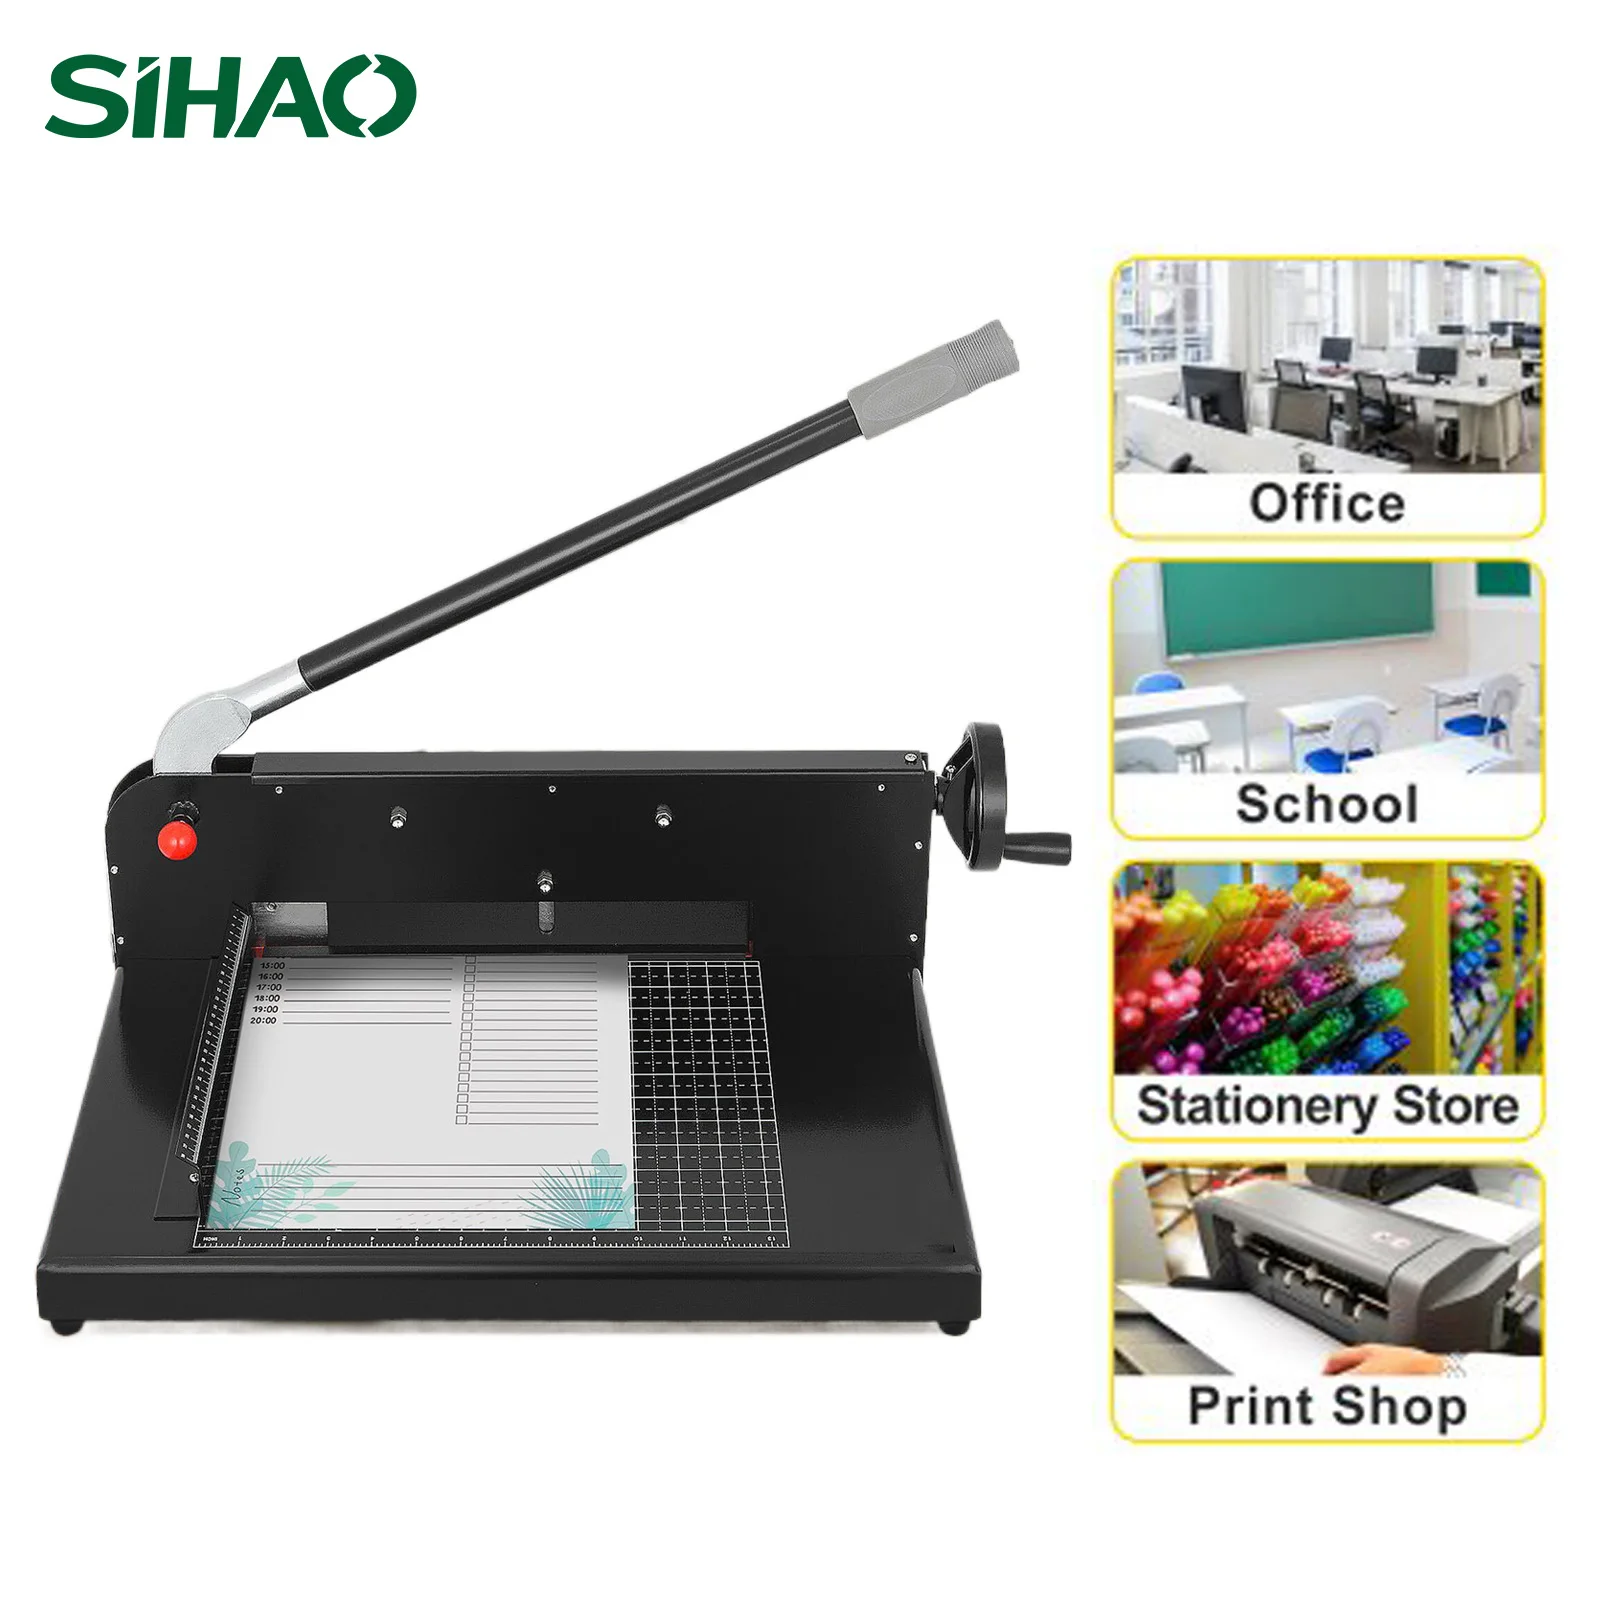 Sihao A4 Manual Paper Cutter Stack Paper Trimmer With Extra Long Handle For Cutting Paper Coupons Labels With Clamp & Safe Lock